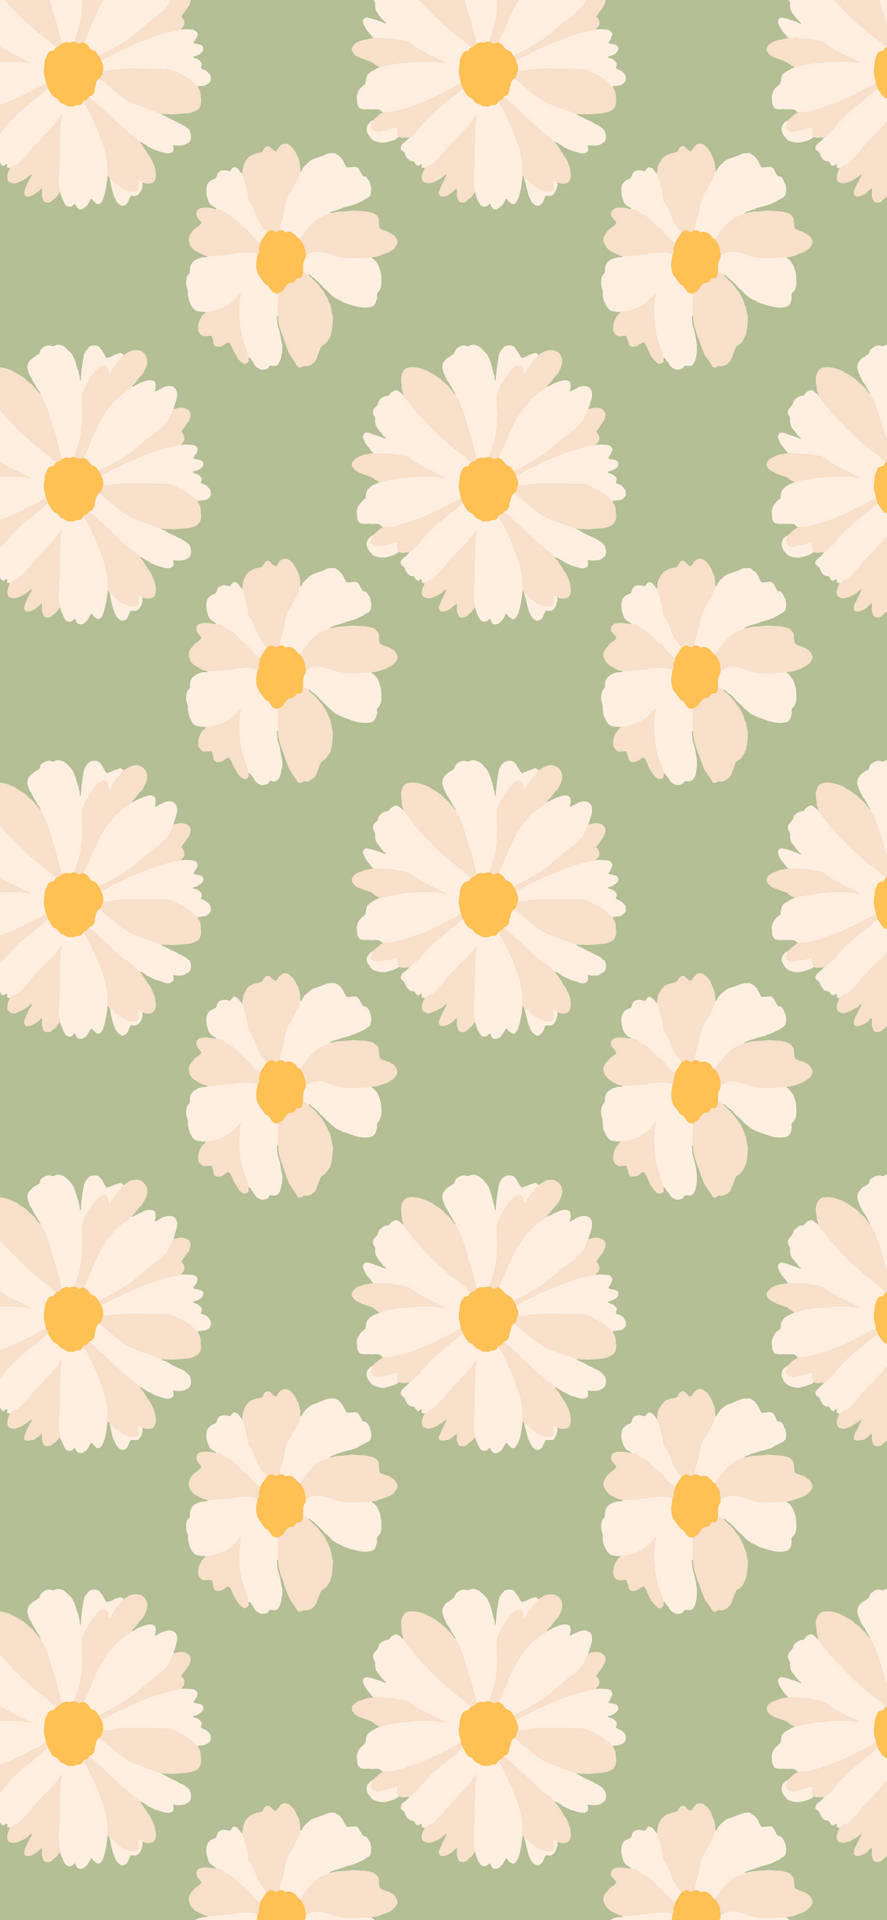 Green Daisy Background Images HD Pictures and Wallpaper For Free Download   Pngtree